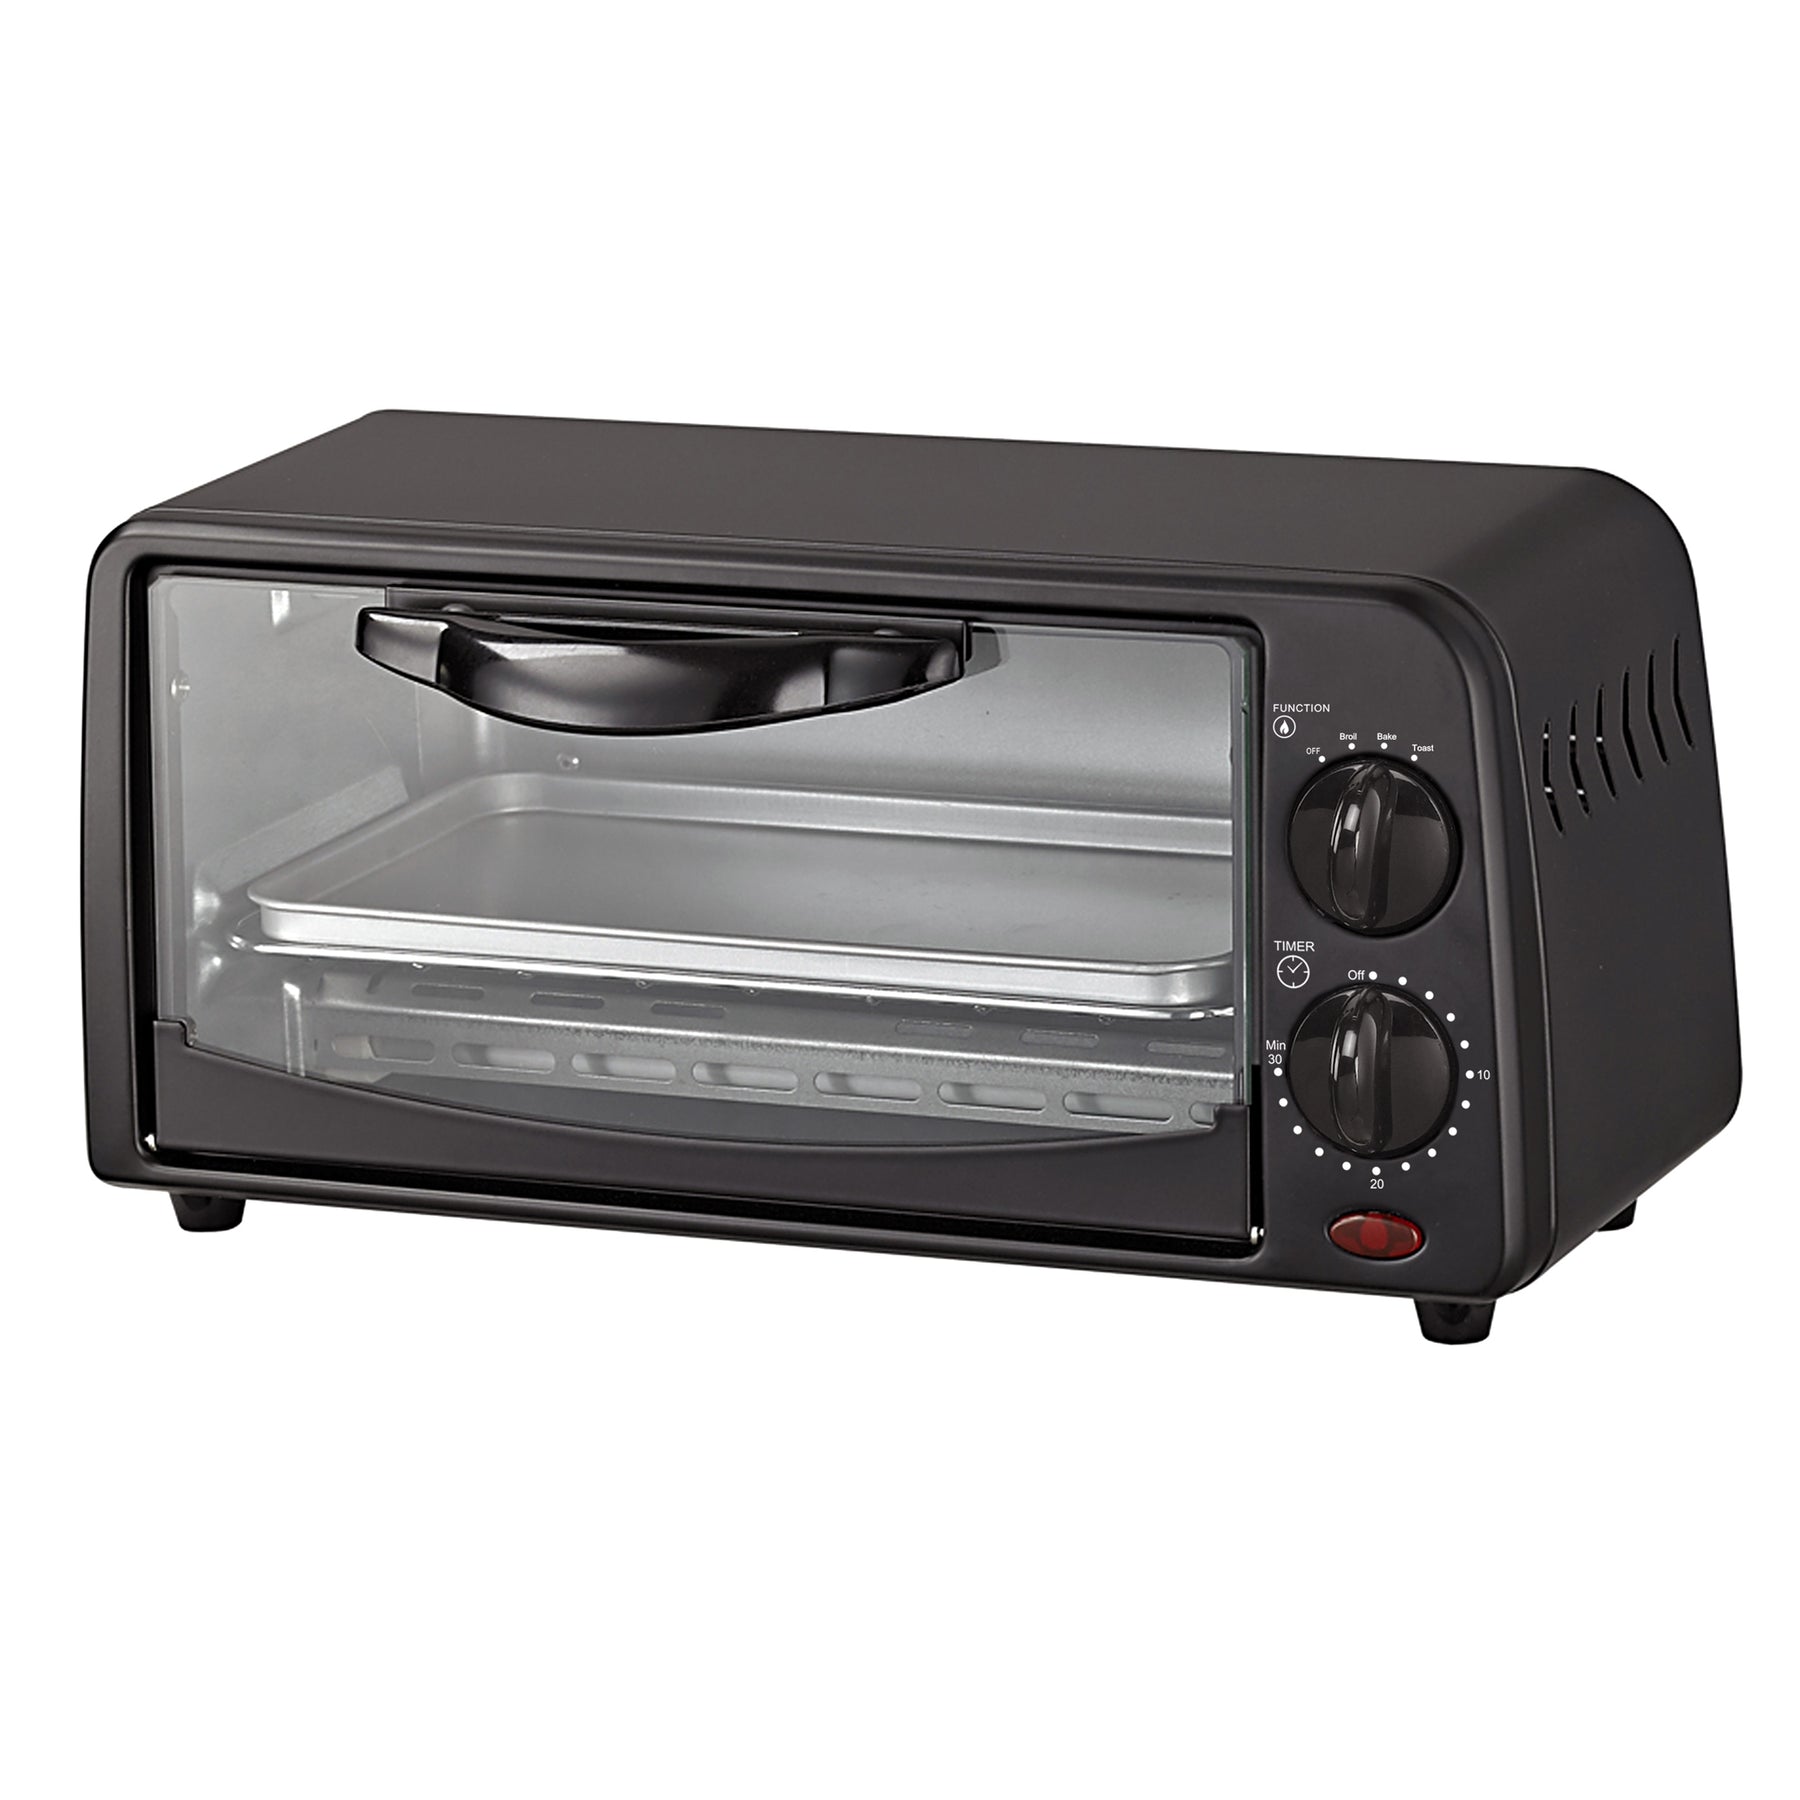 Courant TO621K 2 Slice Compact Toaster Oven with Bake and Broil Functions and 30 Minute Timer, Black TOASTOV 7.48 x 13.33 x 8.39 Inches